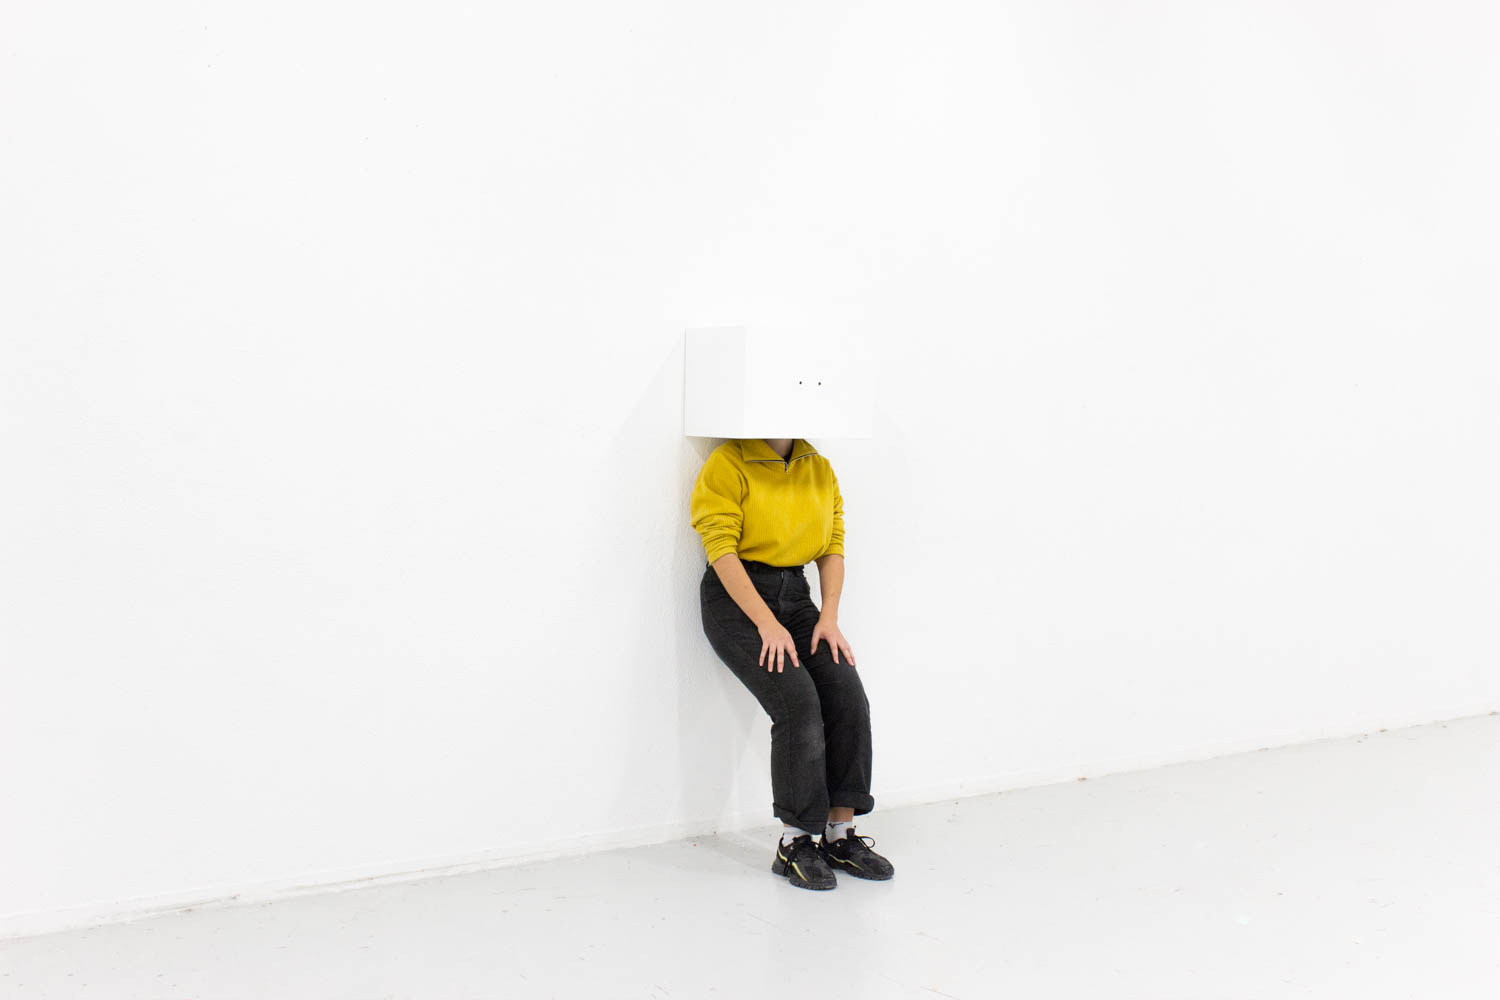 In the white cube